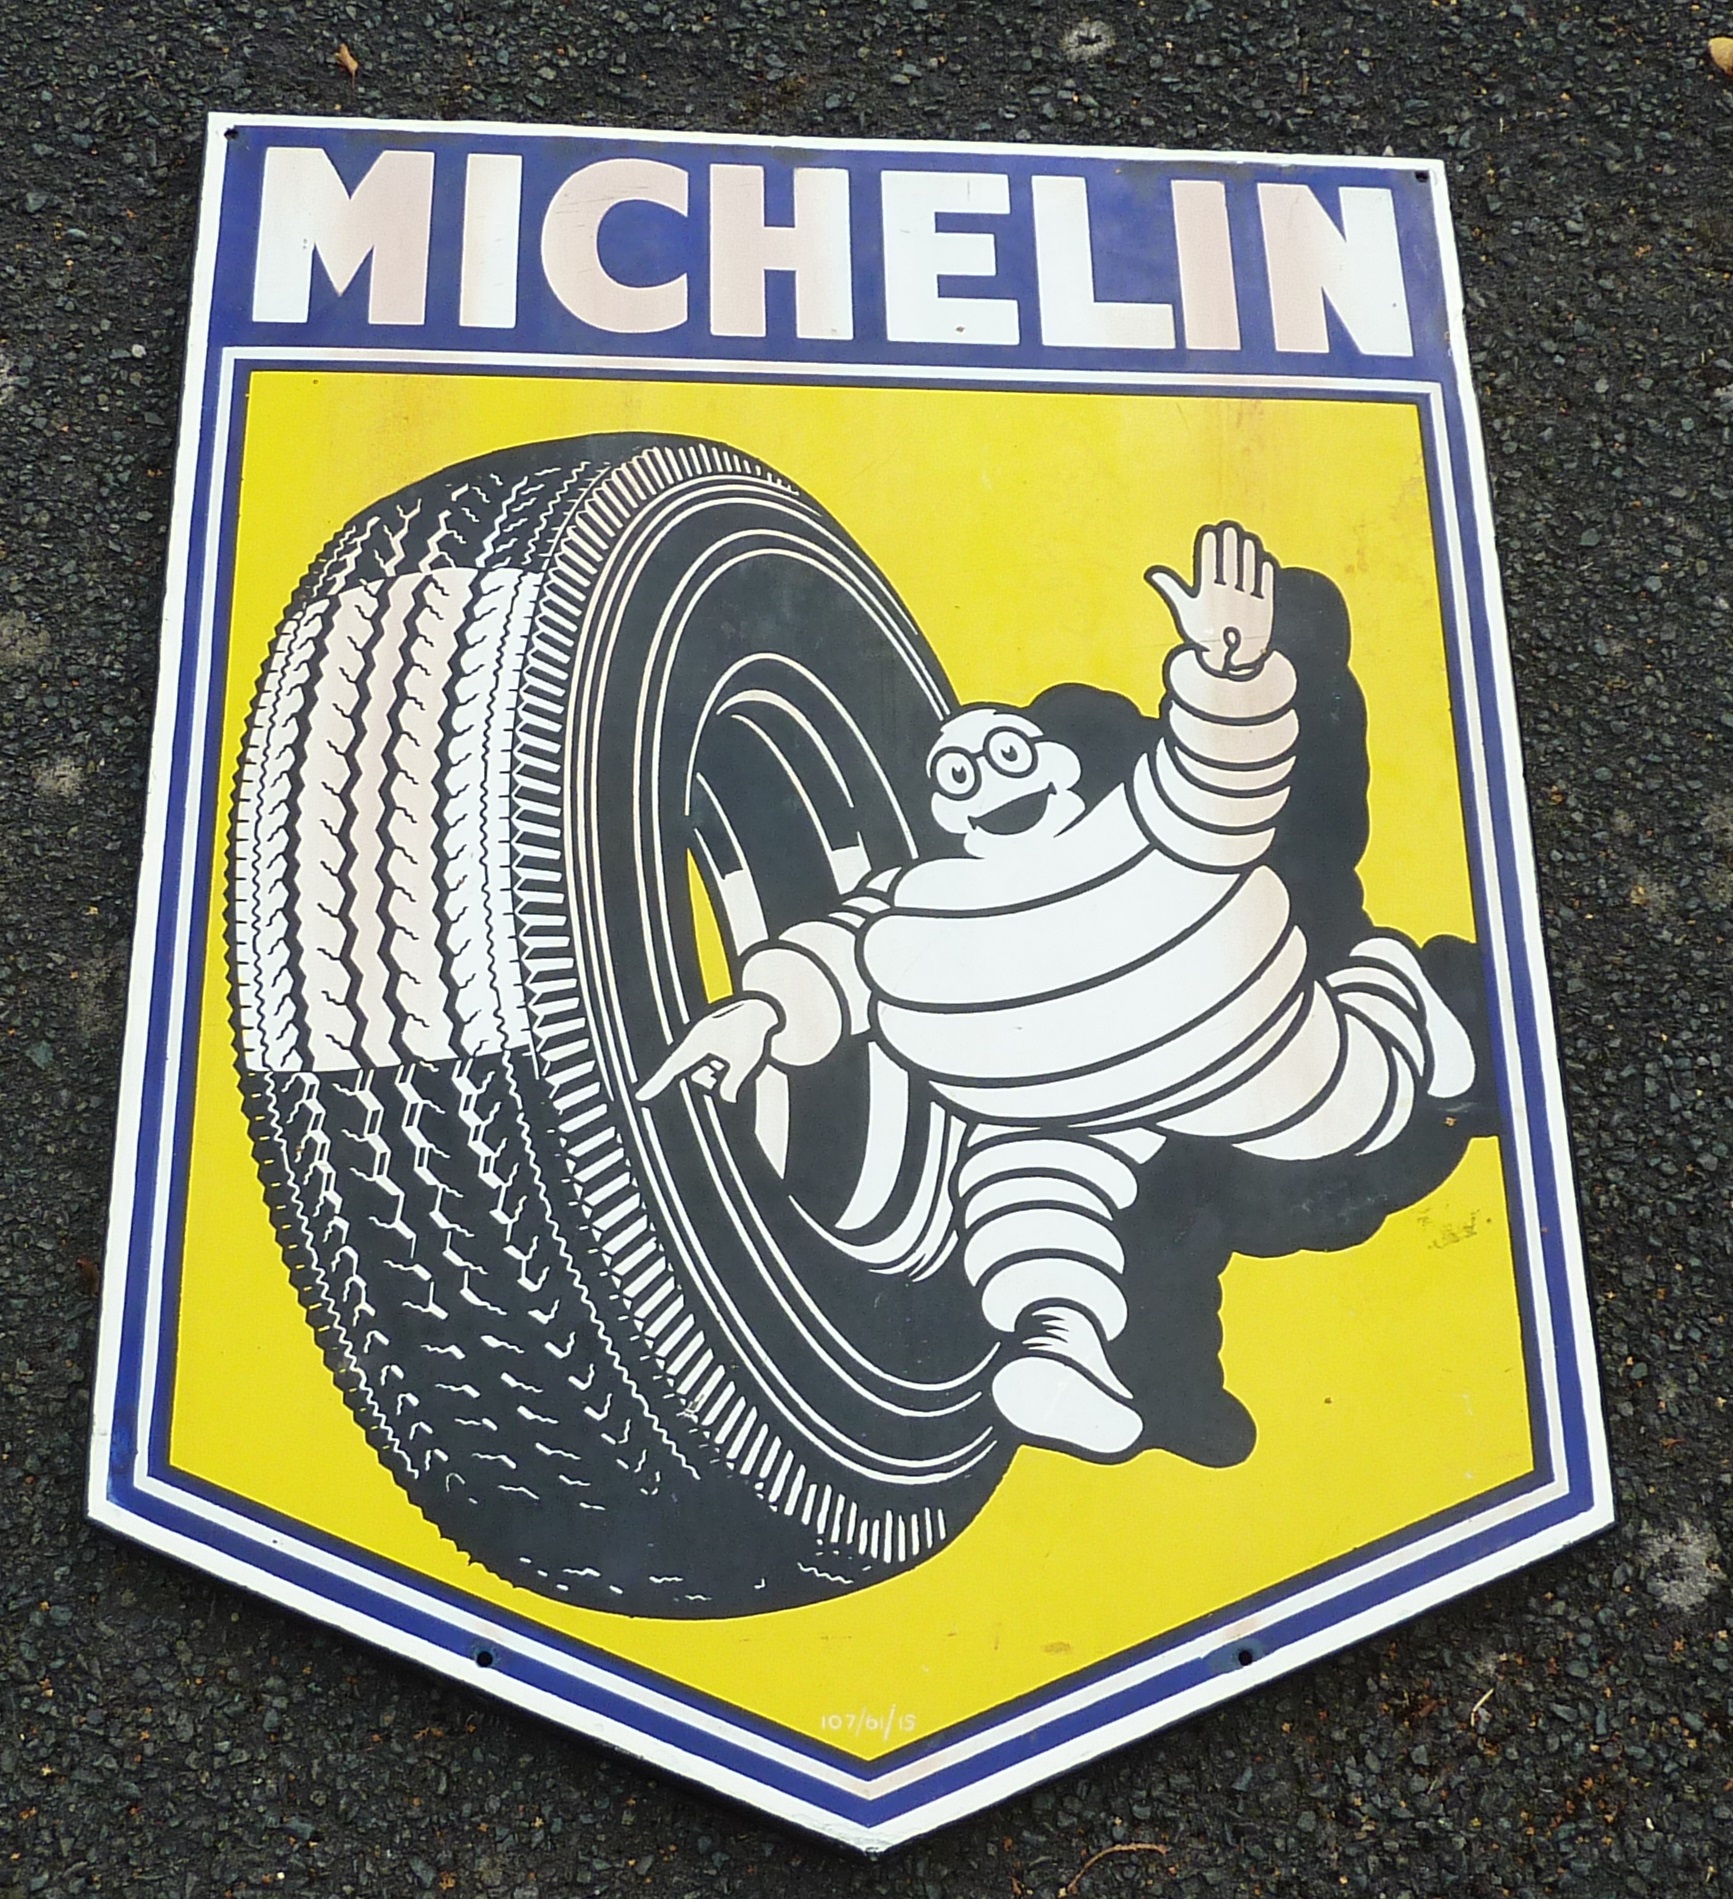 ENAMEL ADVERTISING SIGN MICHELIN APPROX. 24 INS X 32 INS. - MICHELIN MAN AND WHEEL